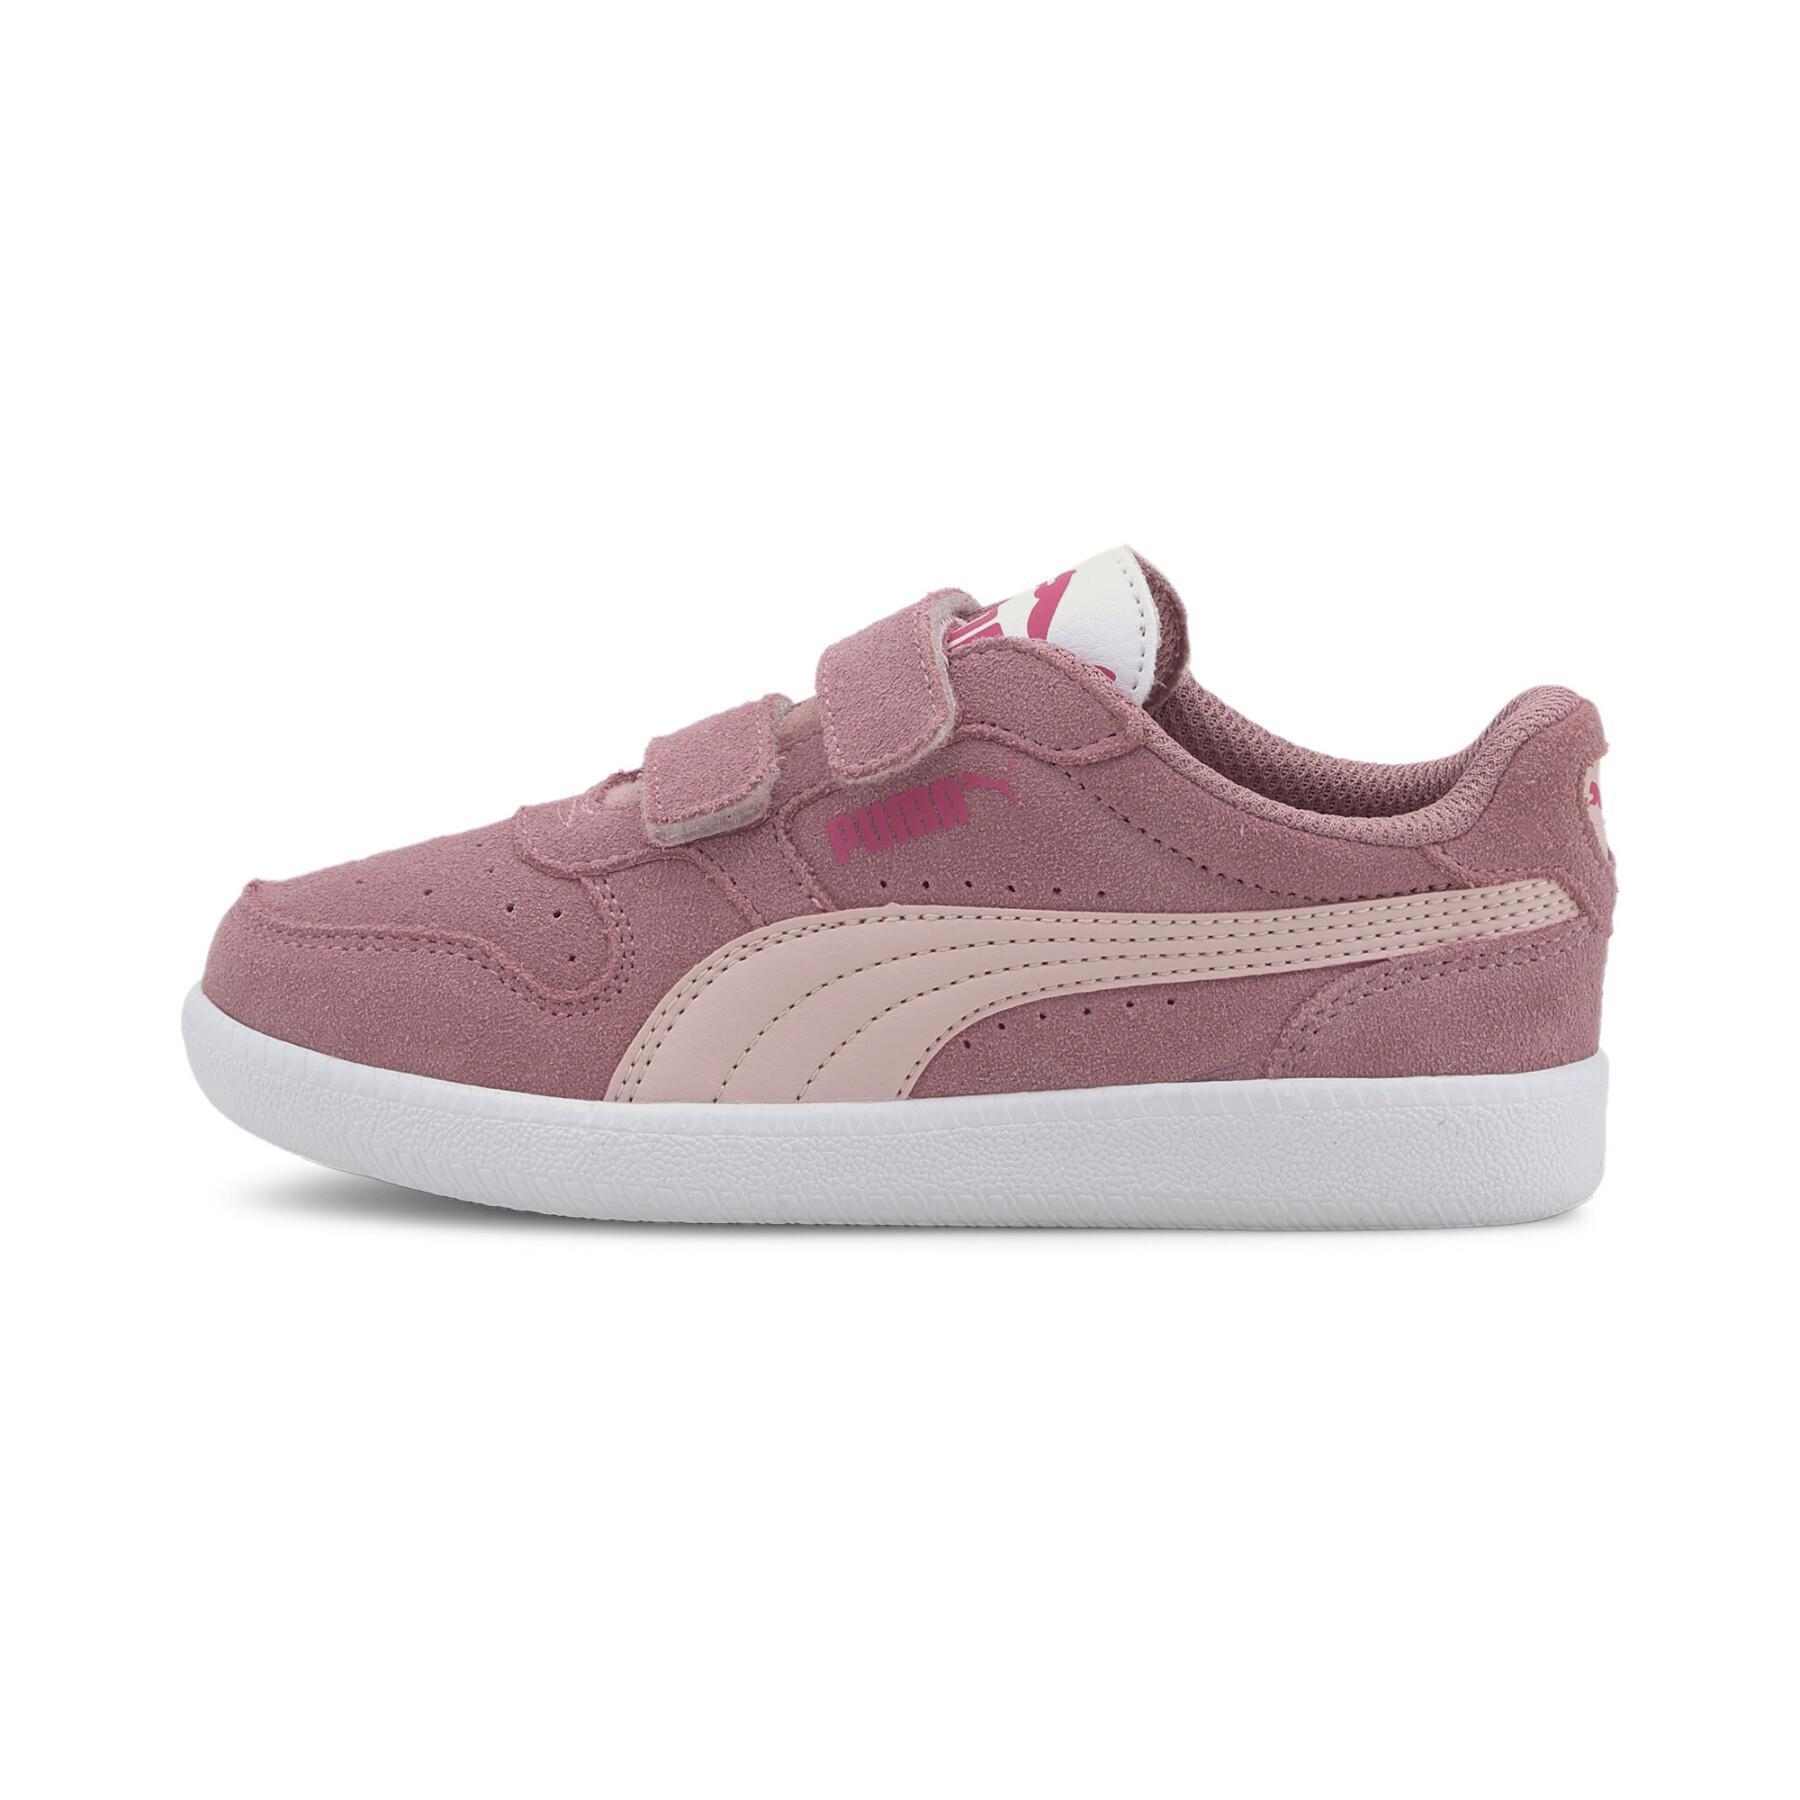 Kindertrainers Puma Icra Trainer SD V PS